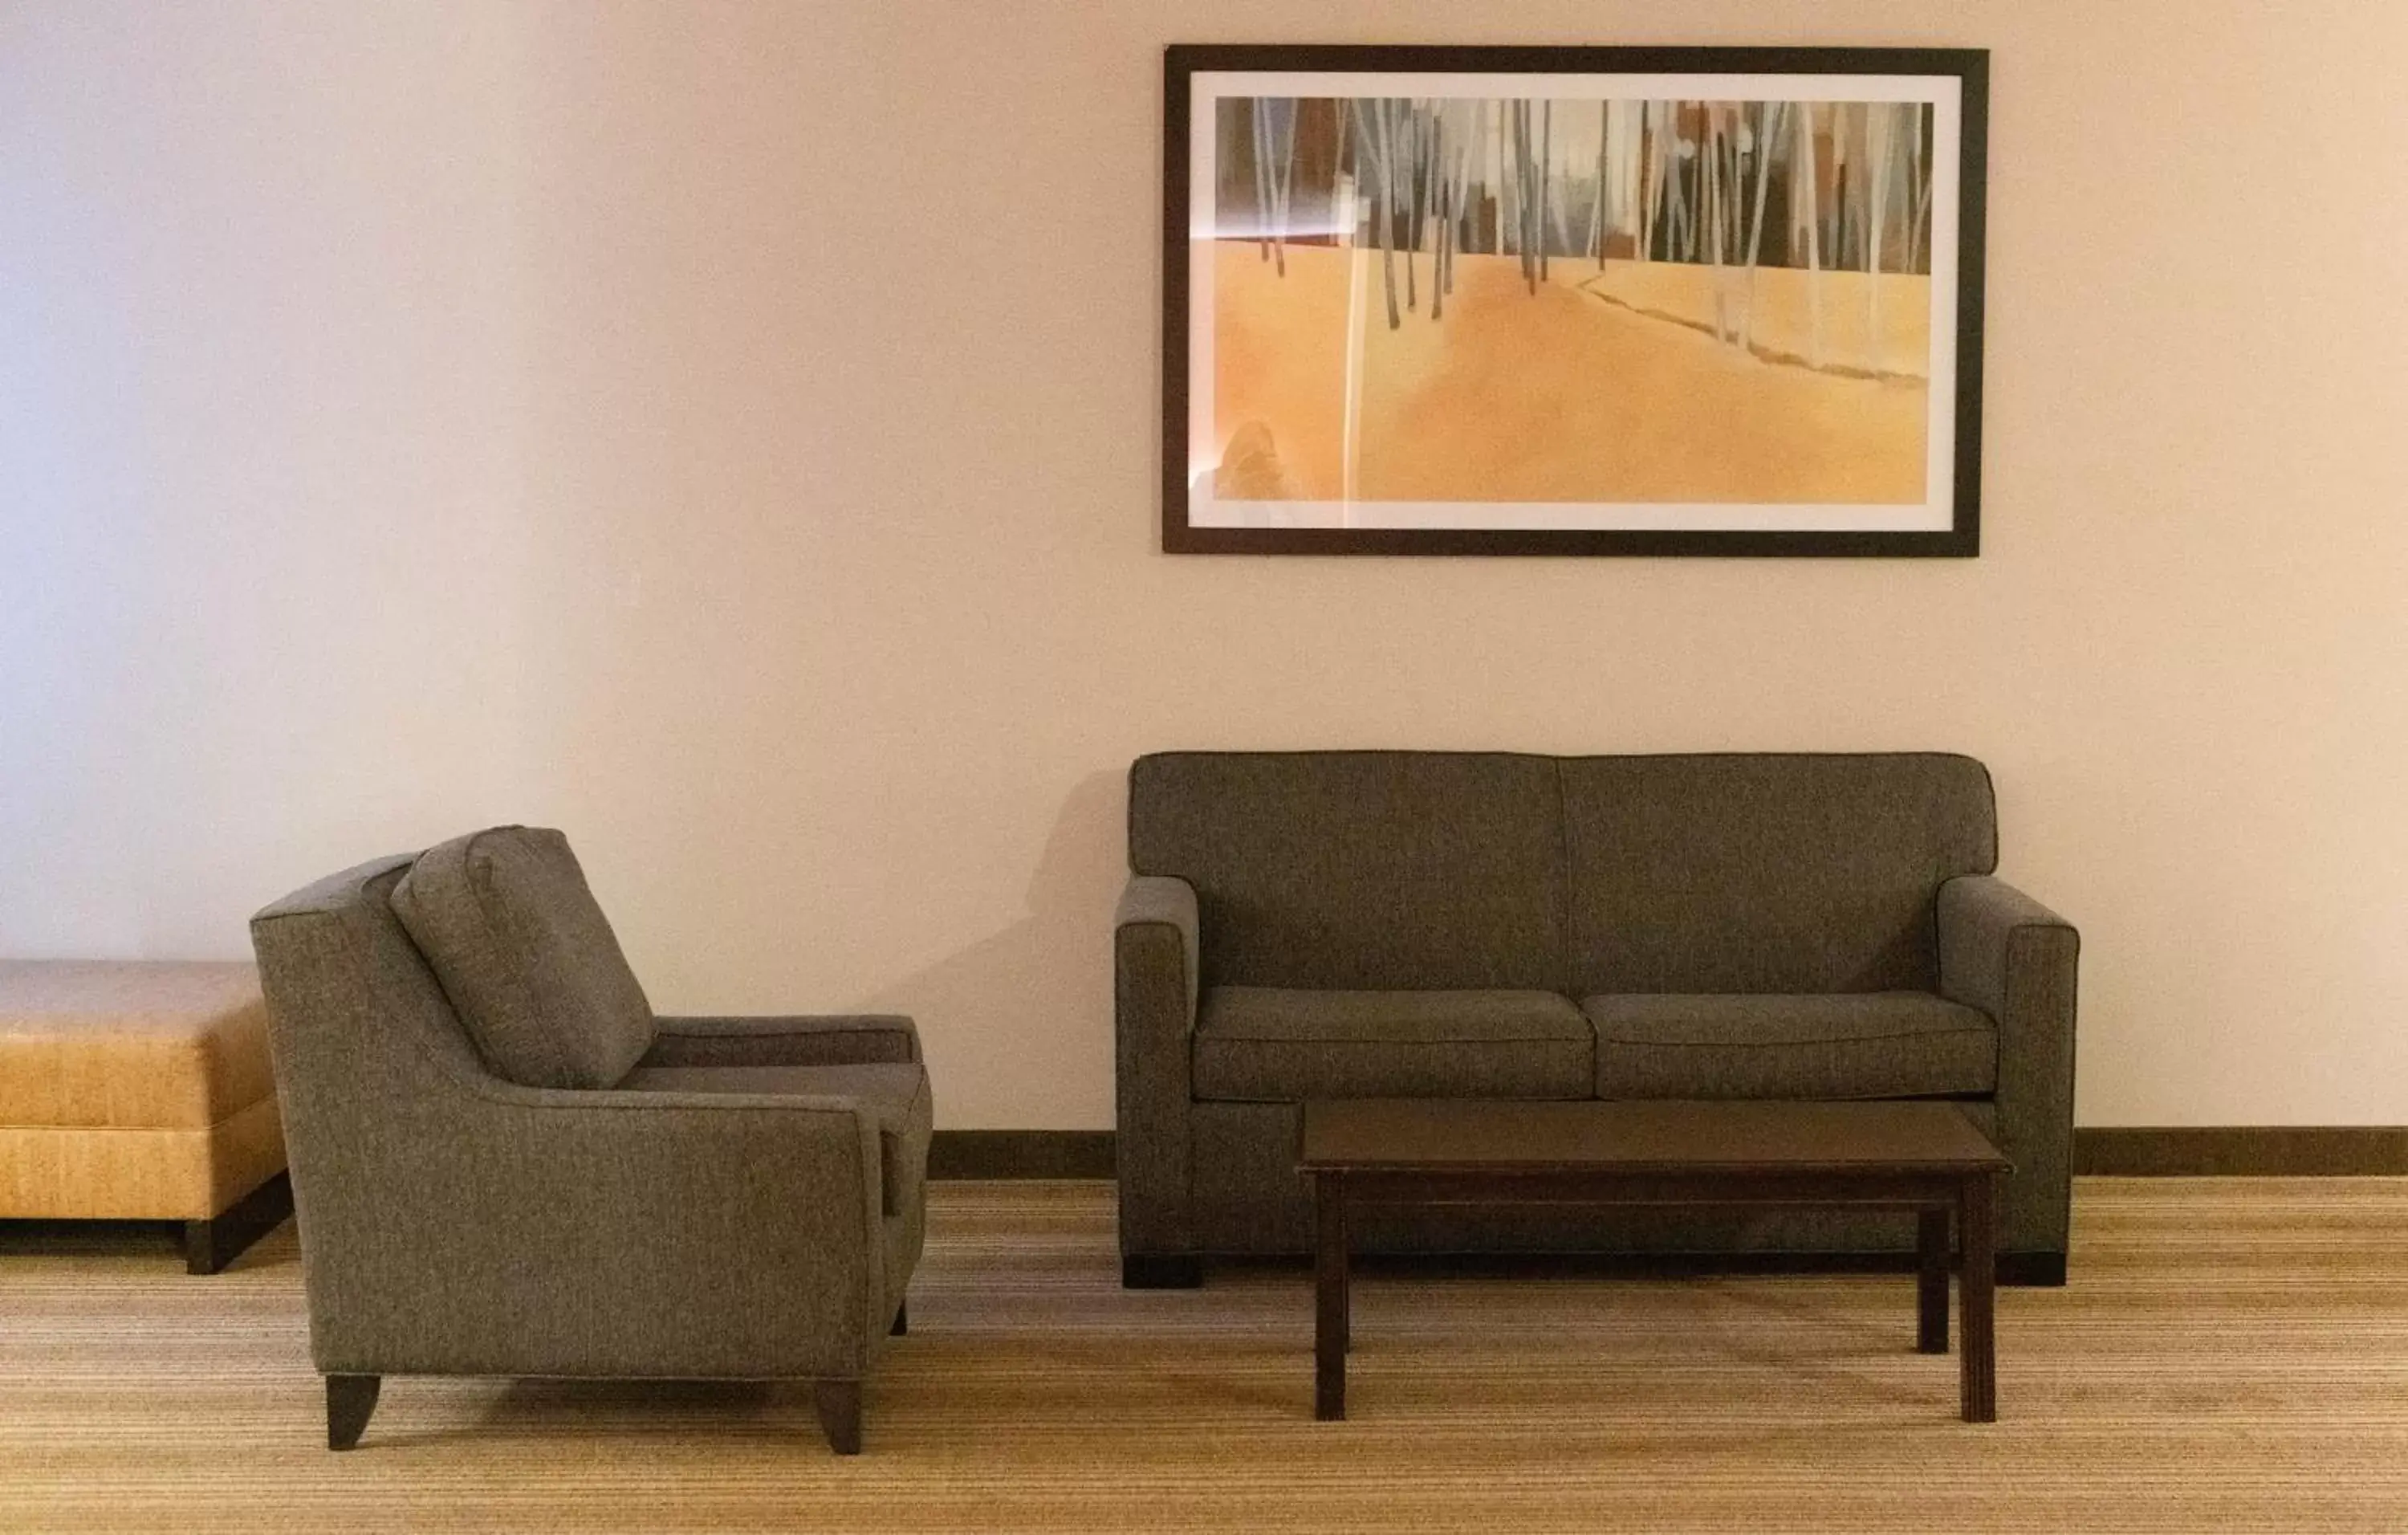 Seating Area in Hawthorn Suites by Wyndham Erie